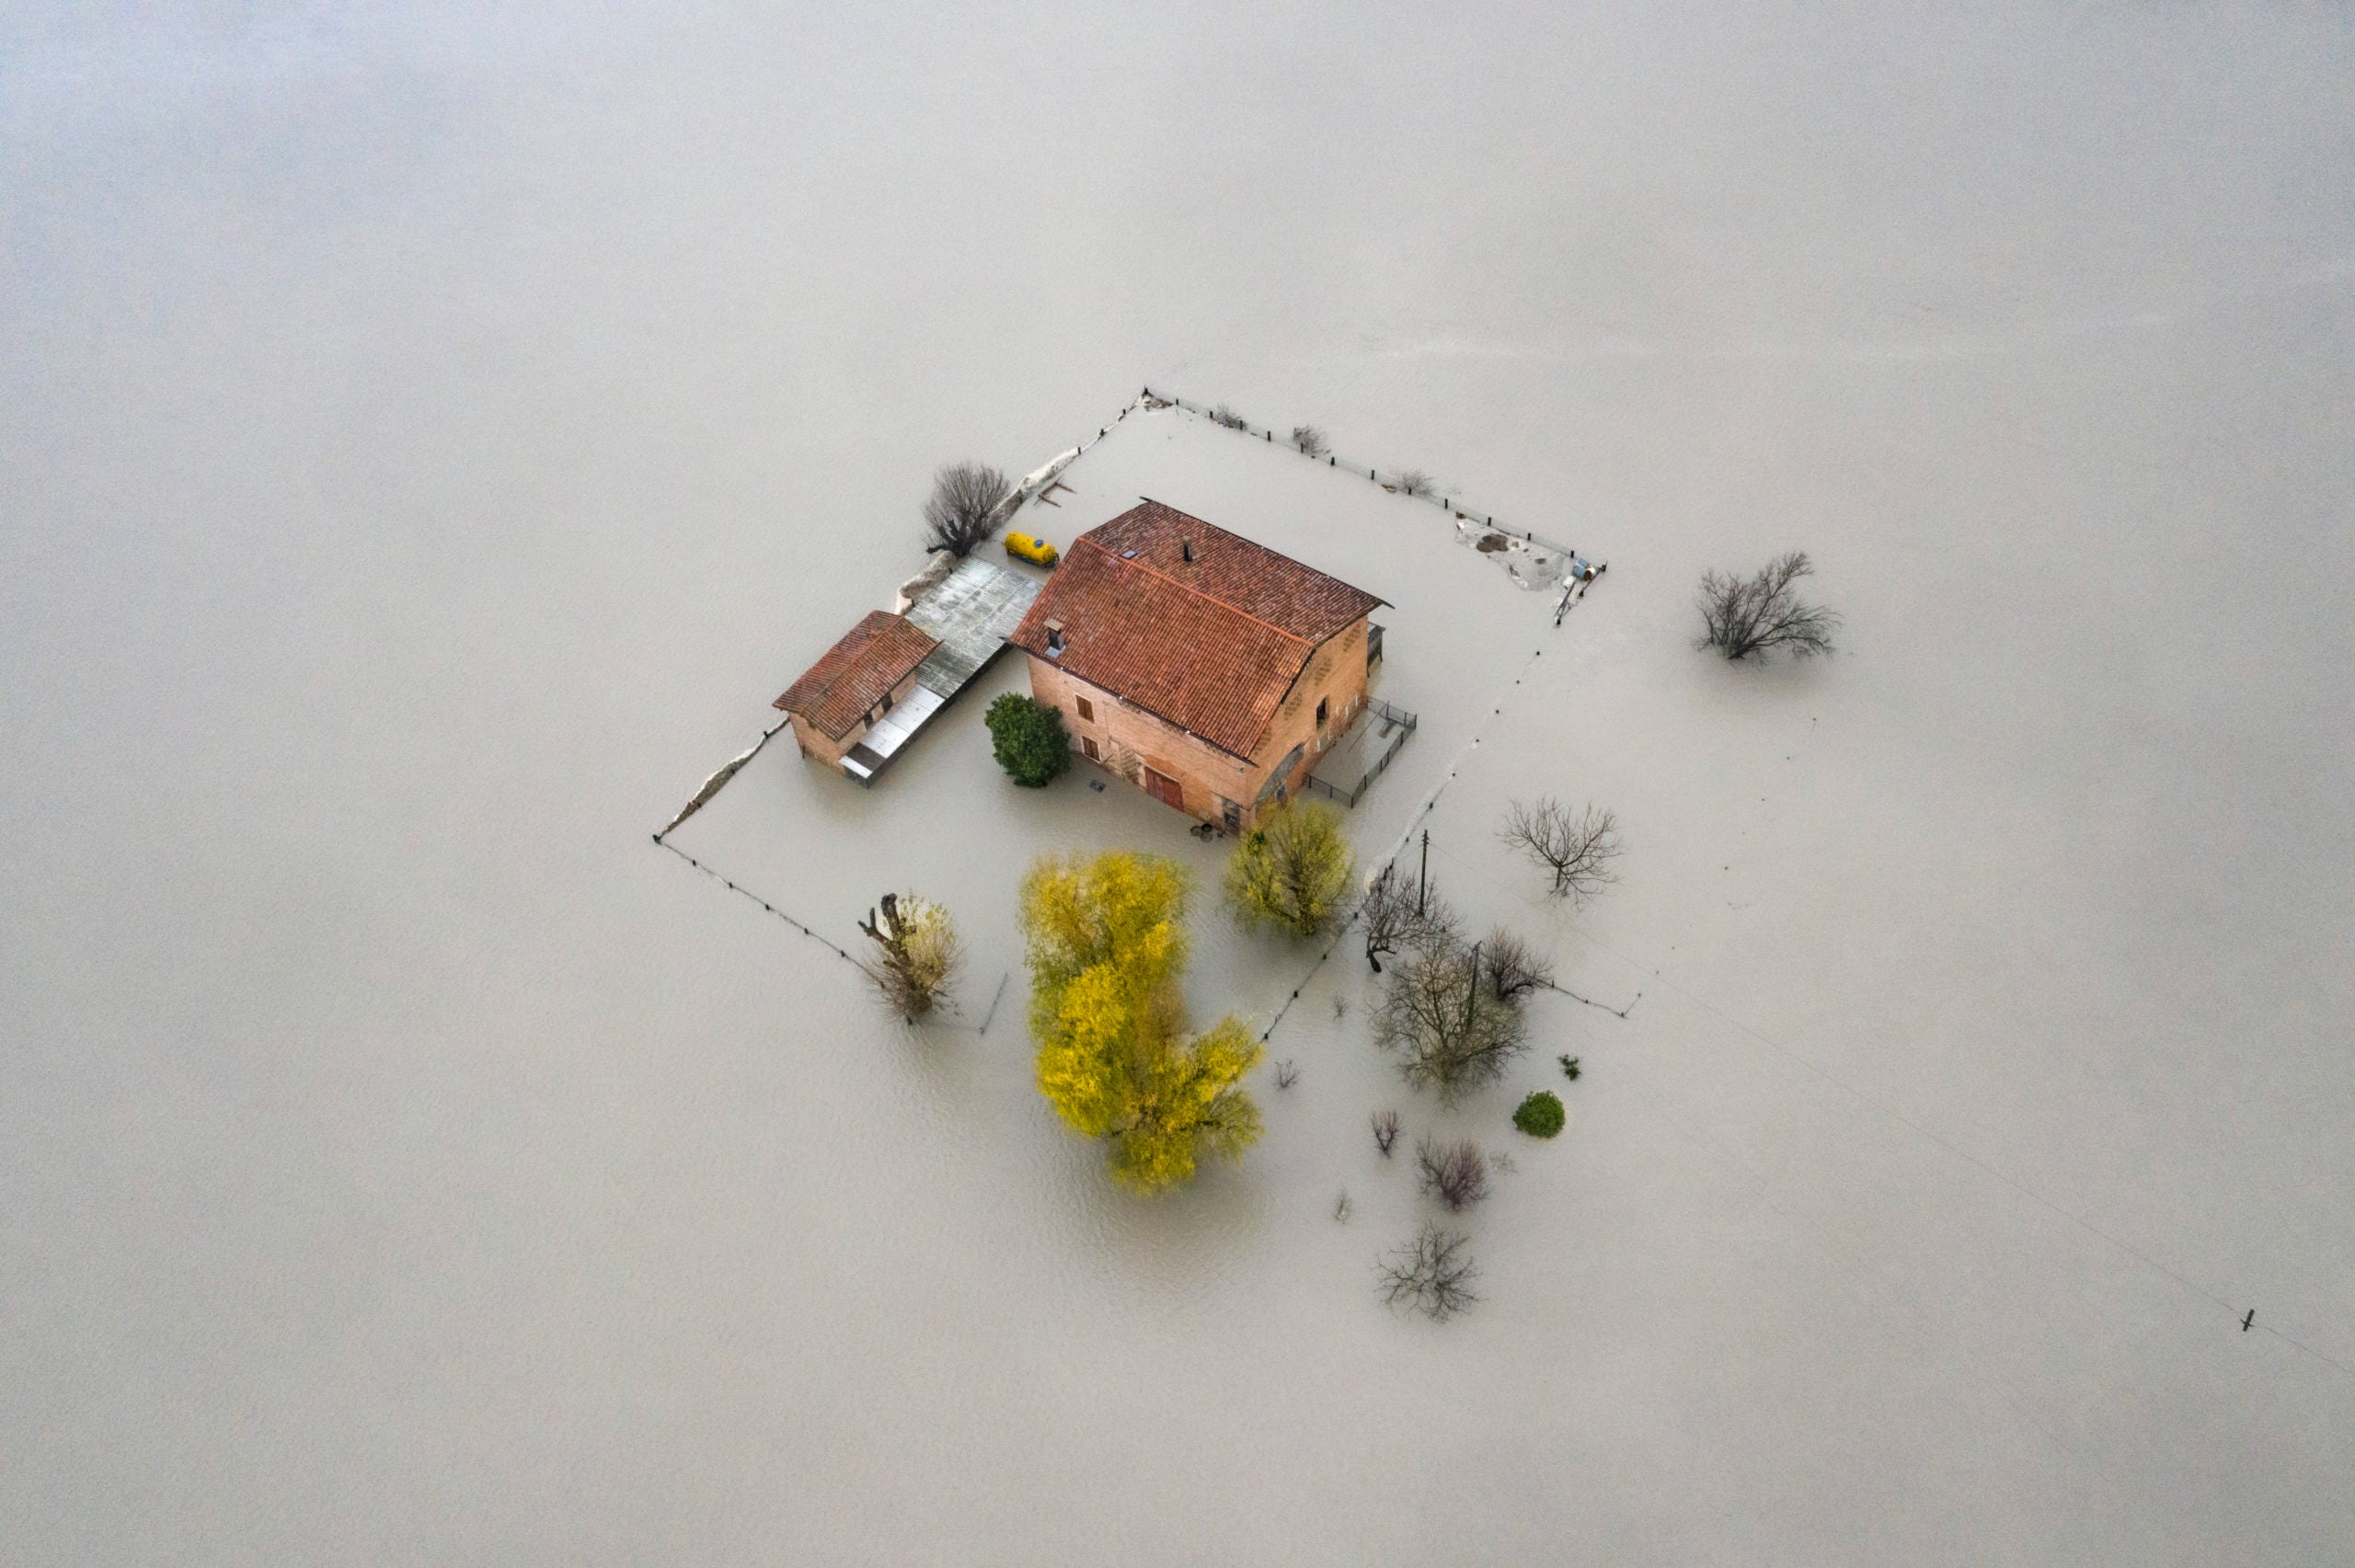 Title: "Ariel view of the Panaro river’s flooding near Modena, Italy."